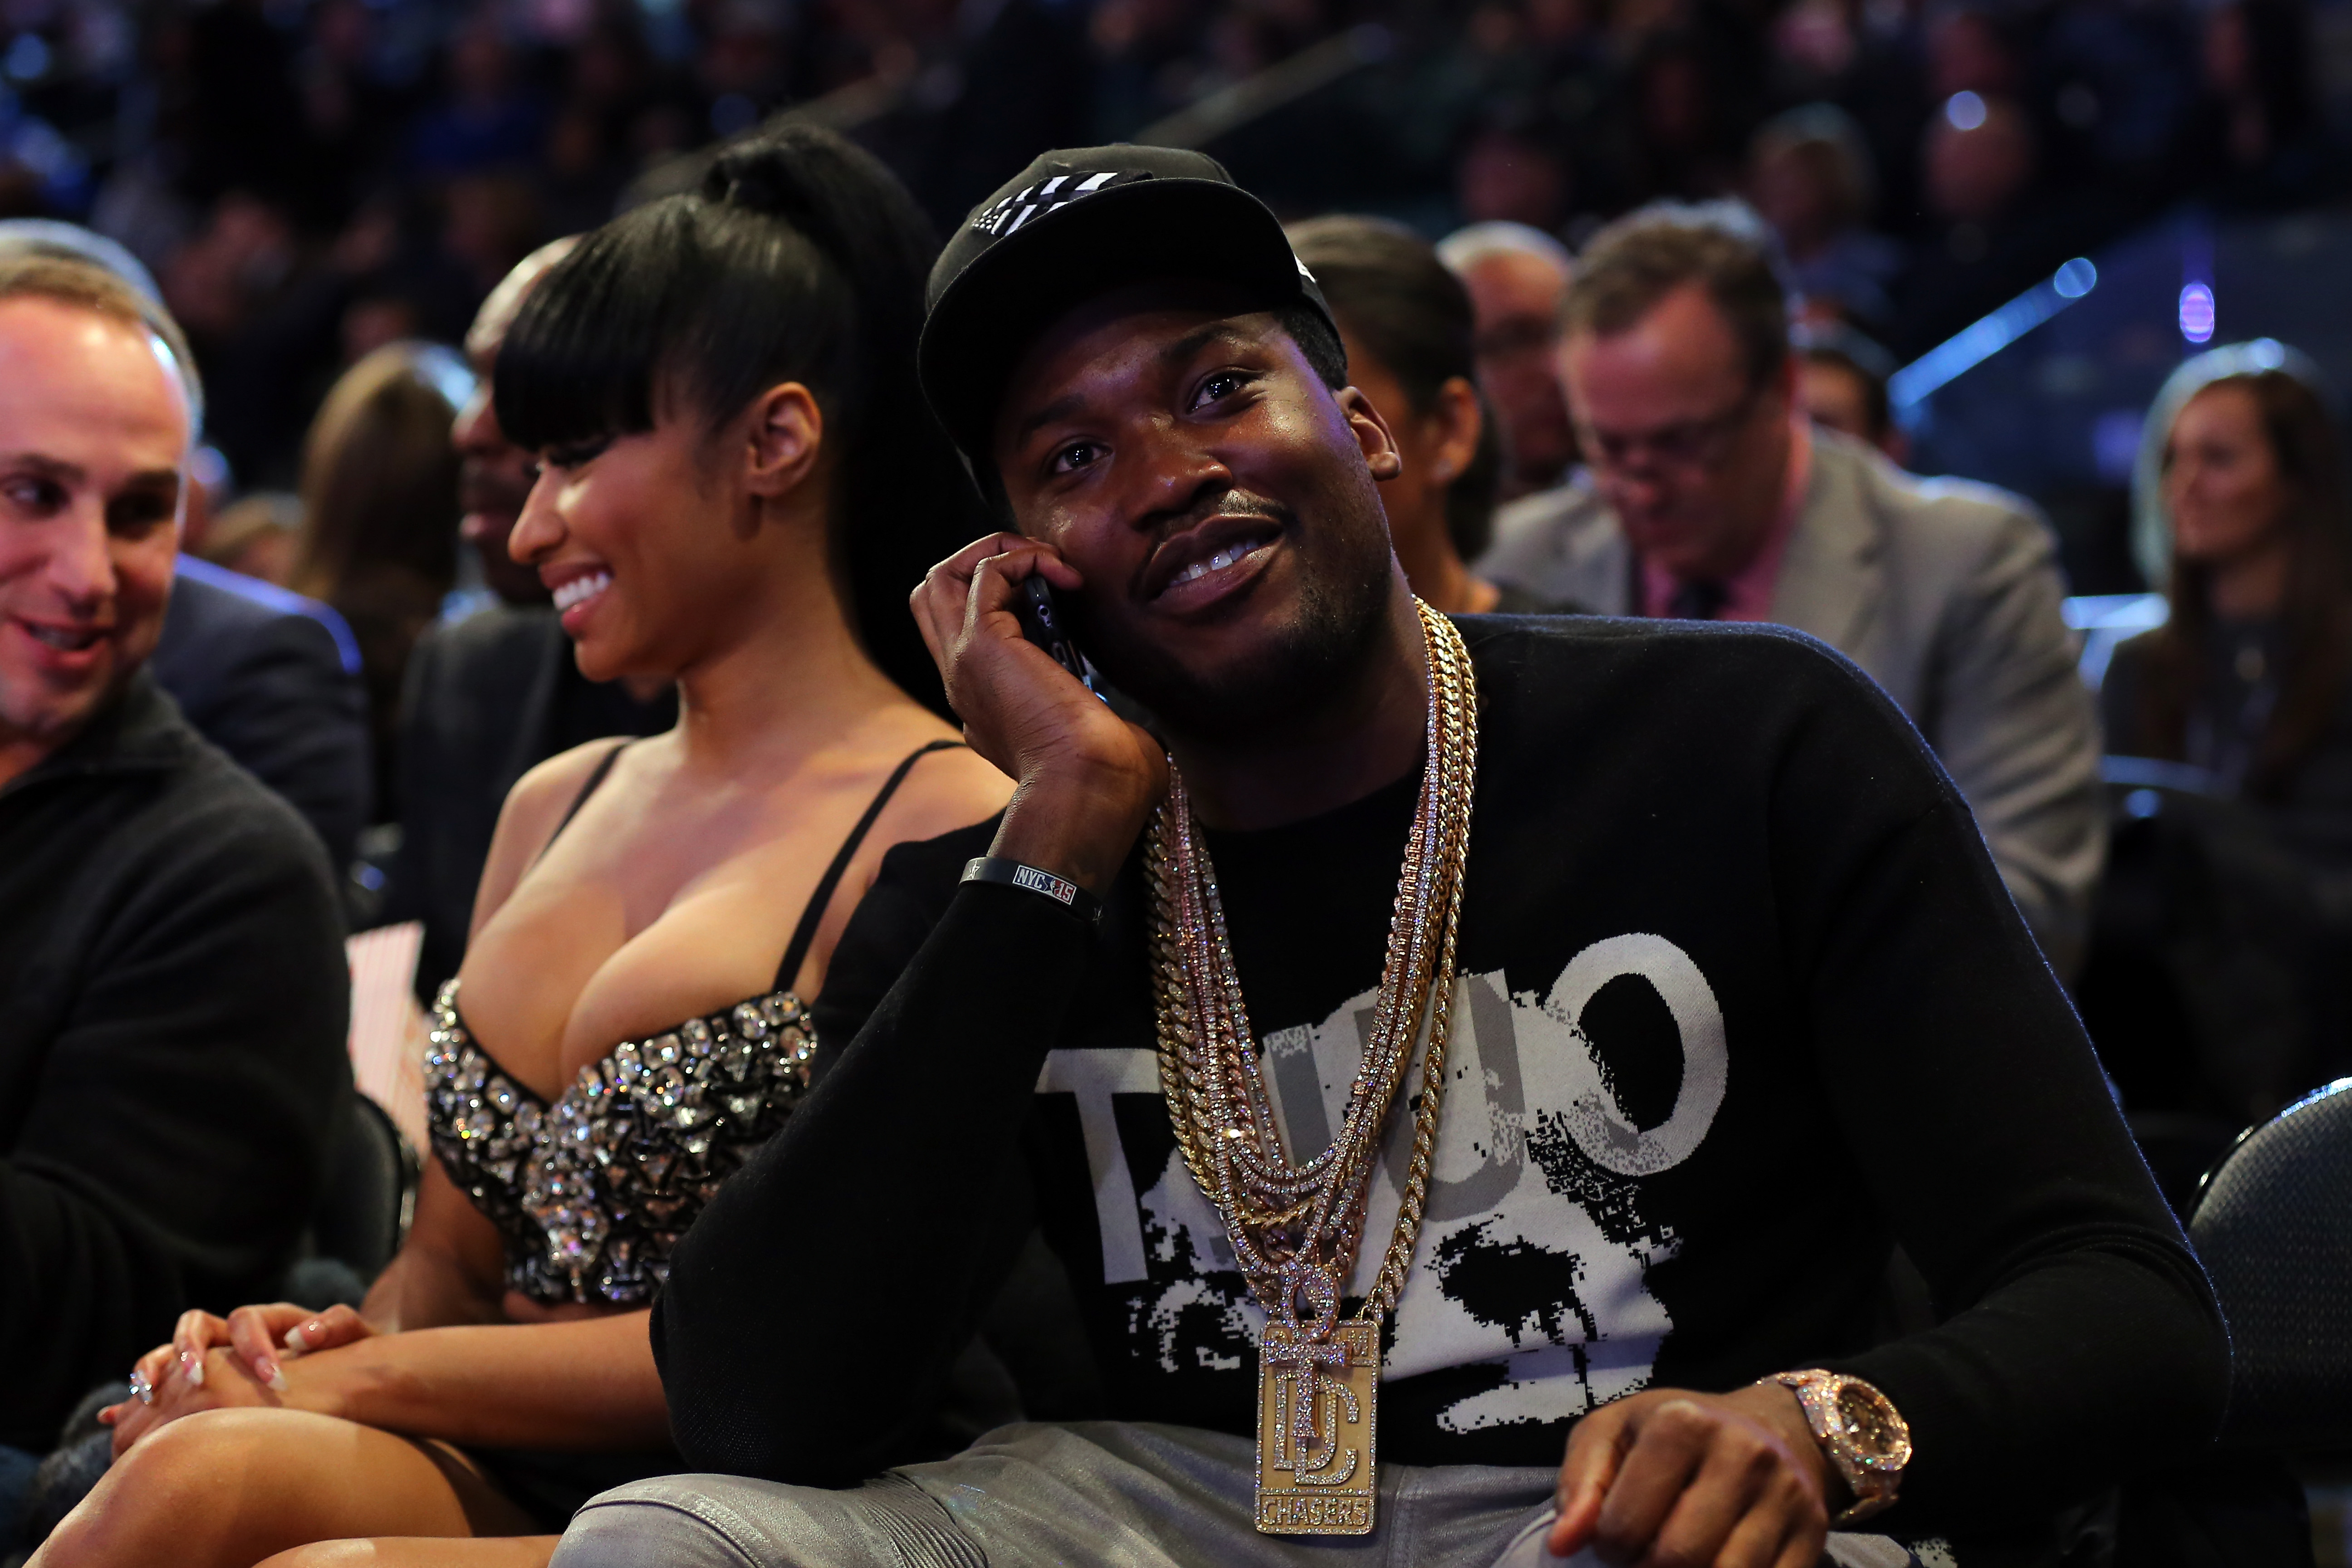 Meek Mill Opens Up About Jail, His Relationship With Nicki Minaj